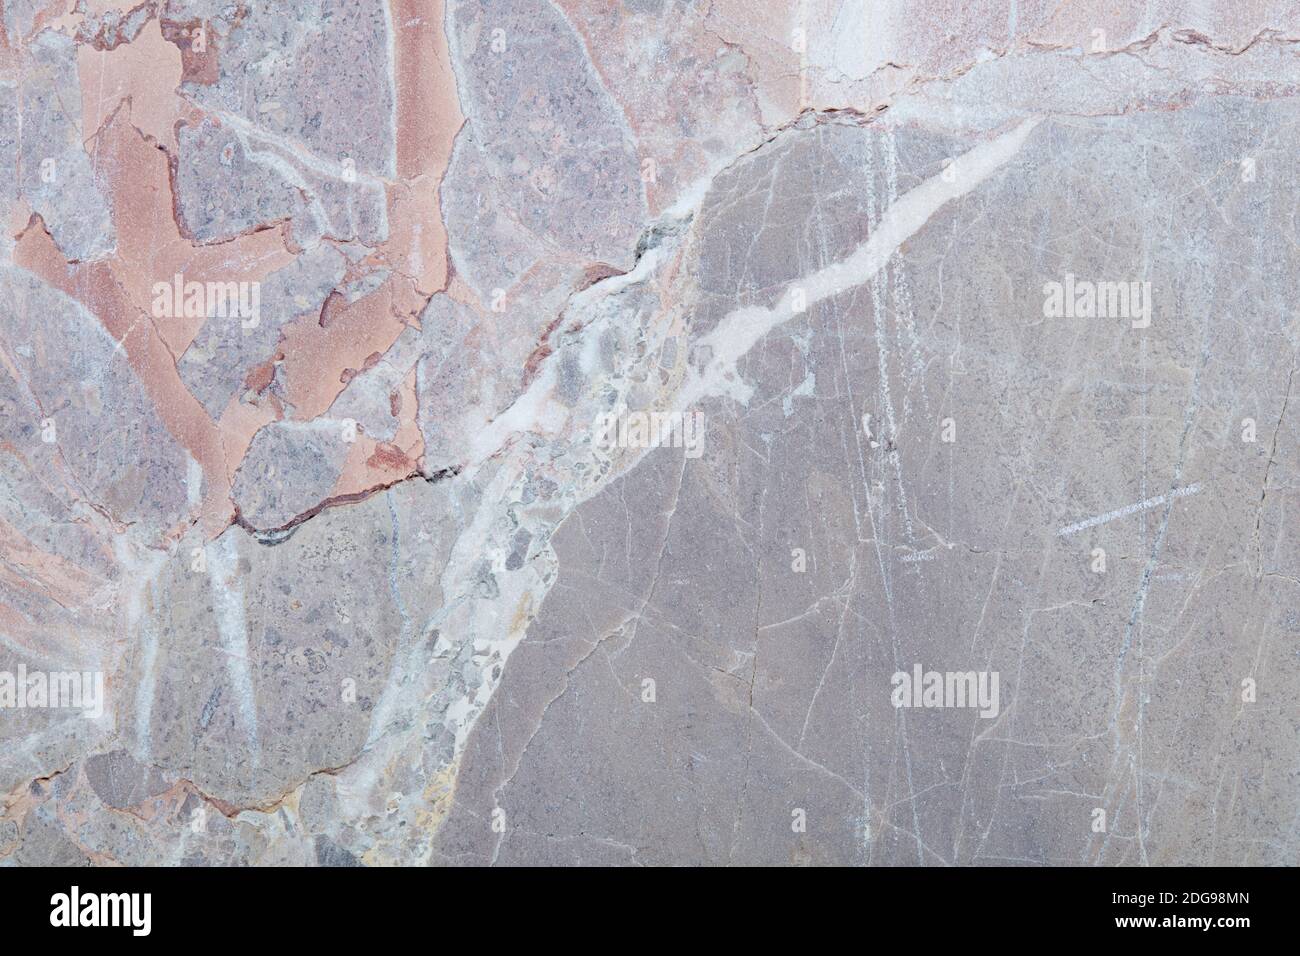 Variegated stone with grey, white and colors texture background with scratches Stock Photo